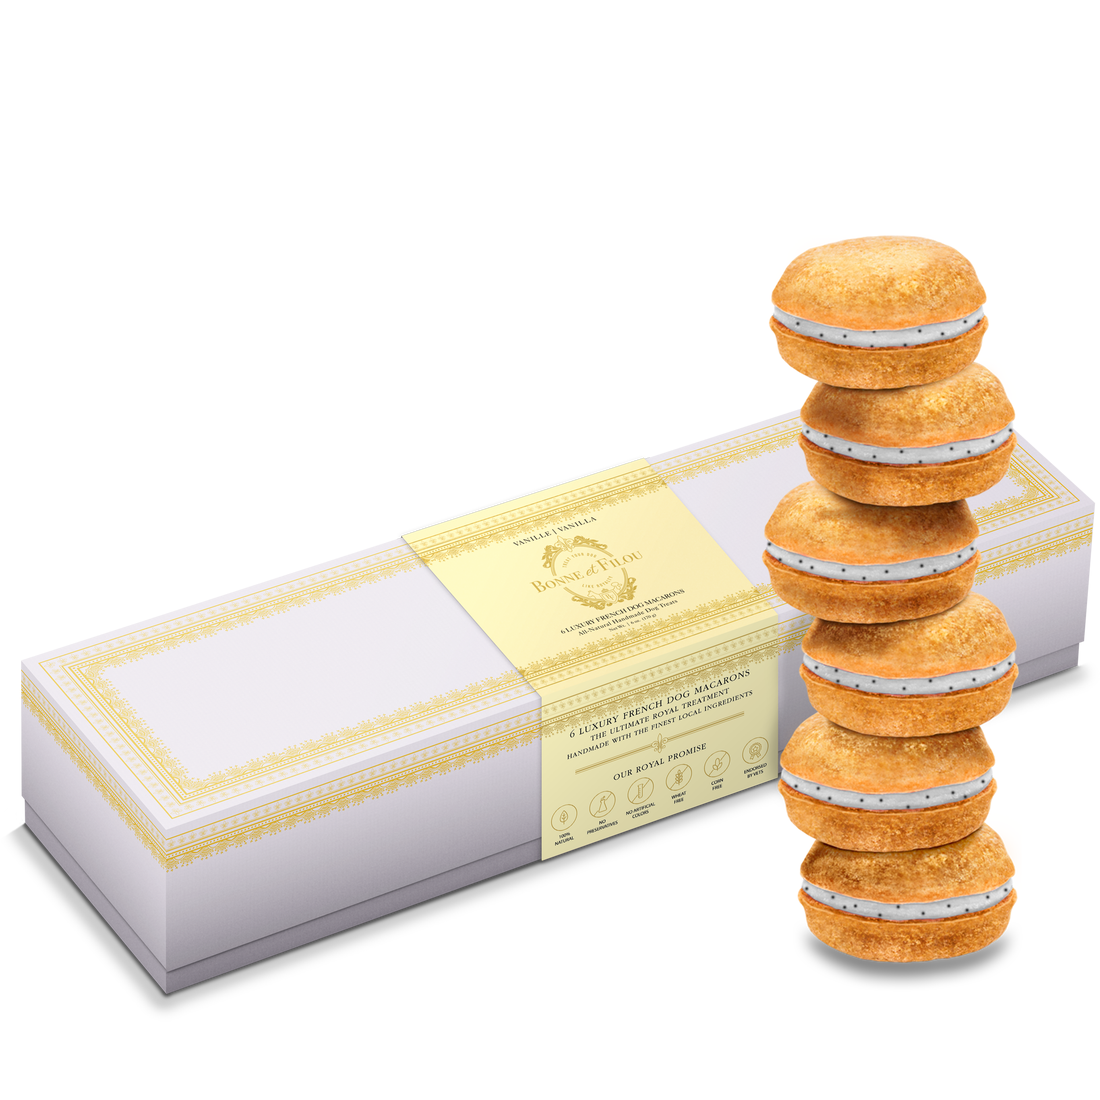 French Lavender Macaron Box of 6 - Backordered